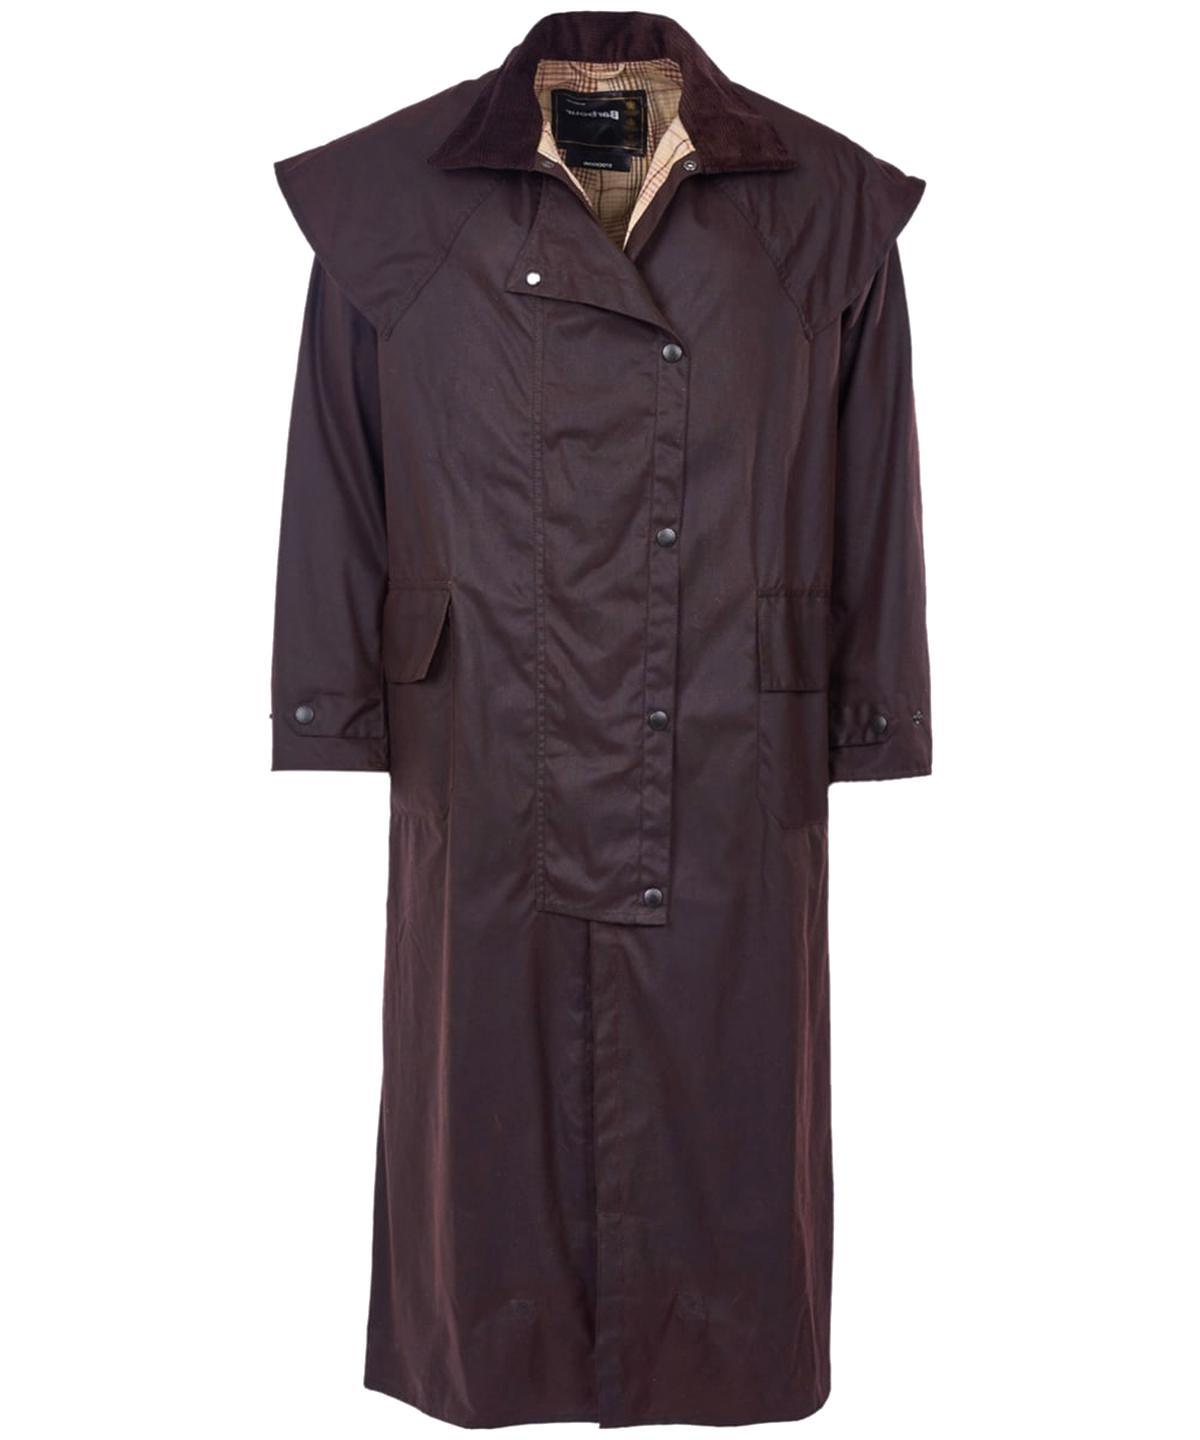 Stockman Coat for sale in UK | 68 used Stockman Coats